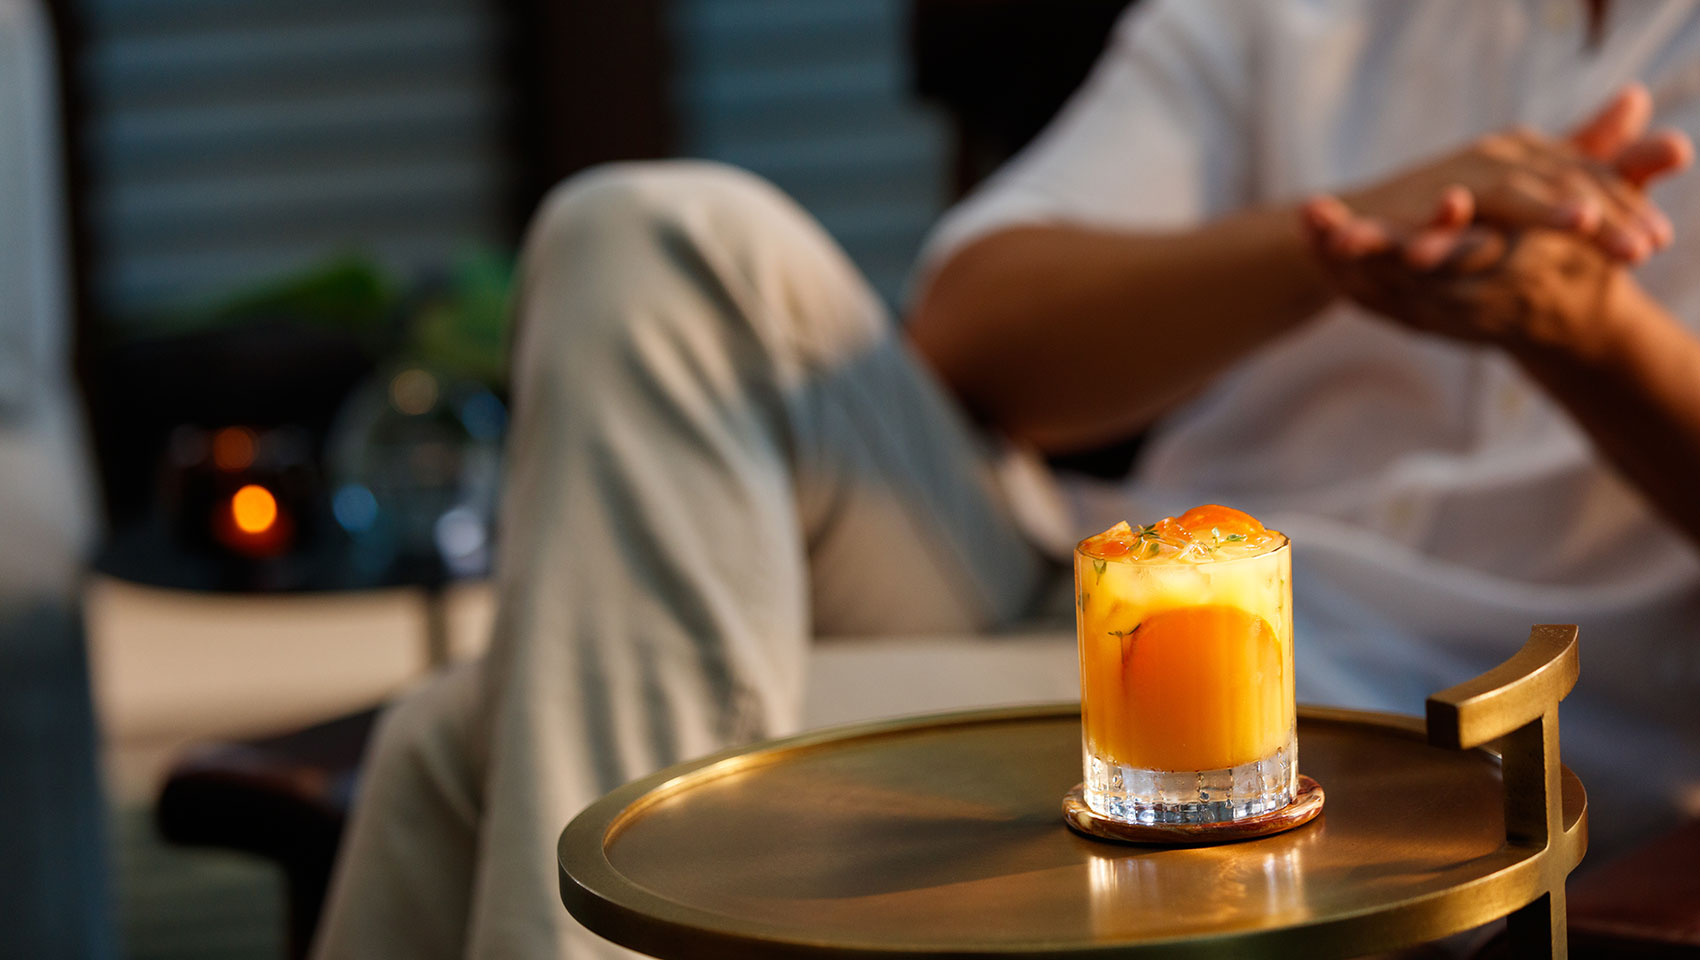 cocktail on table with man sitting in chair in background